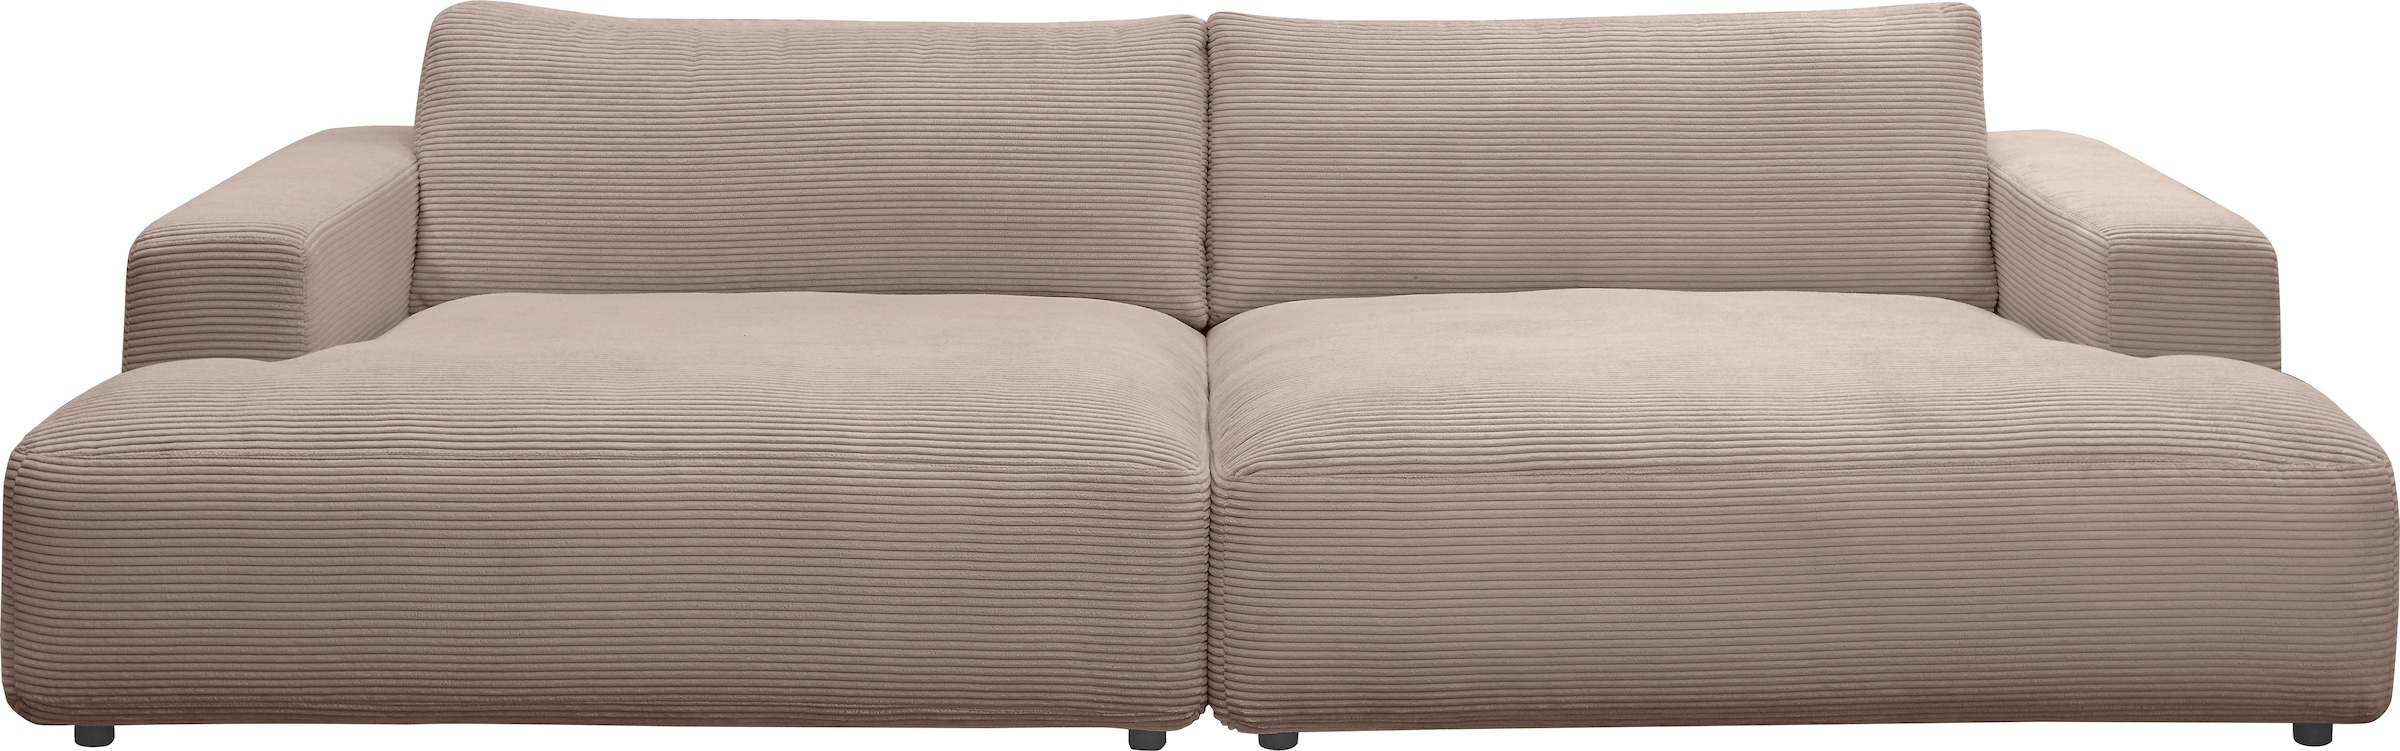 GALLERY M branded Loungesofa Musterring OTTO Shop cm Breite Online by 292 Cord-Bezug, »Lucia«